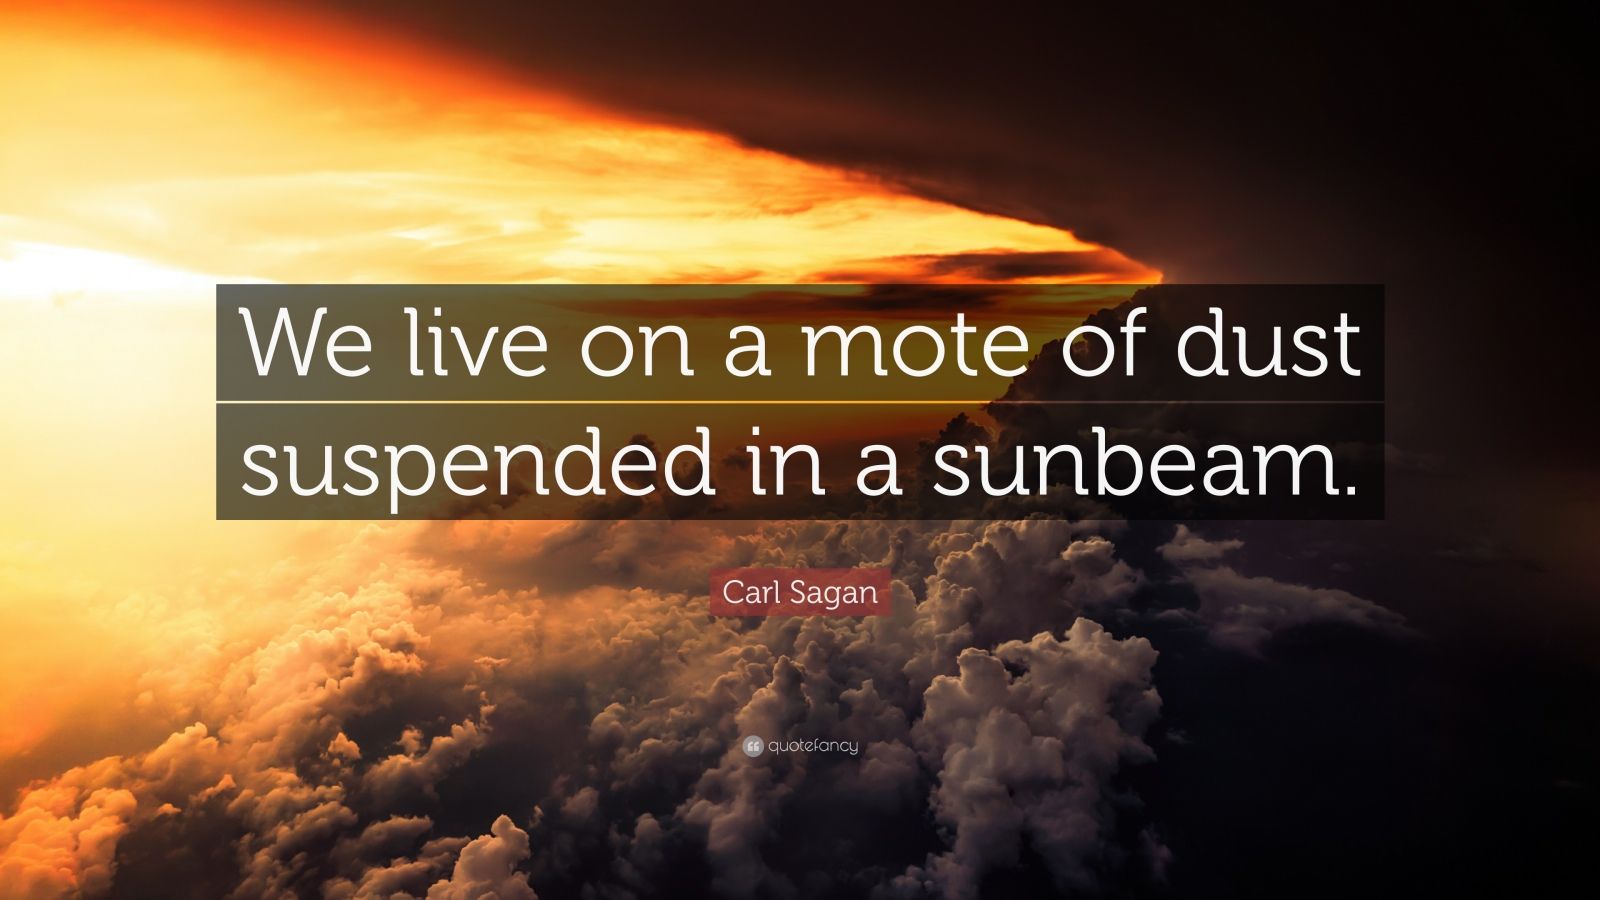 Carl Sagan Quote “We live on a mote of dust suspended in